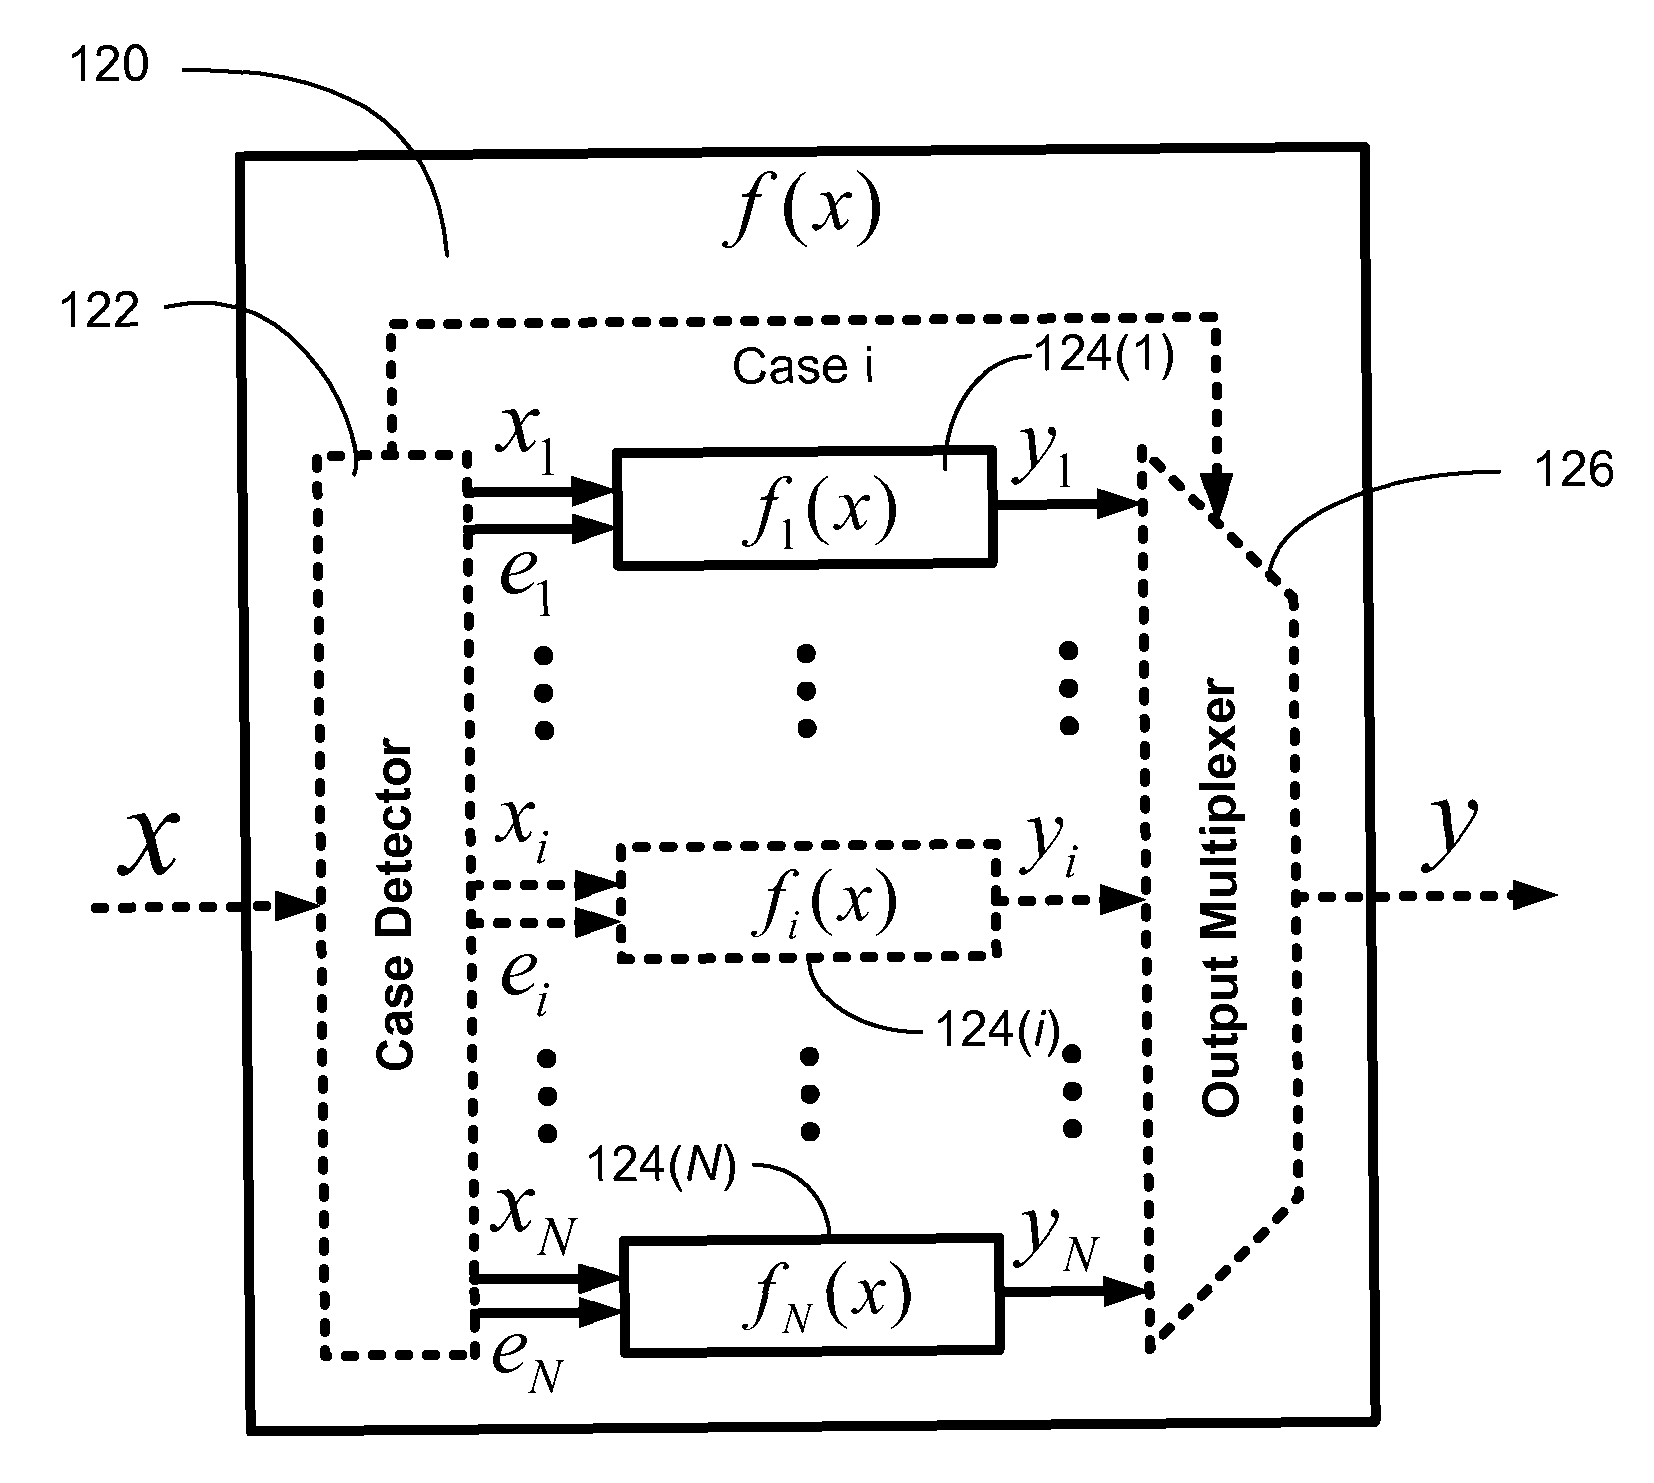 Efficient function generator using case detection and output selection